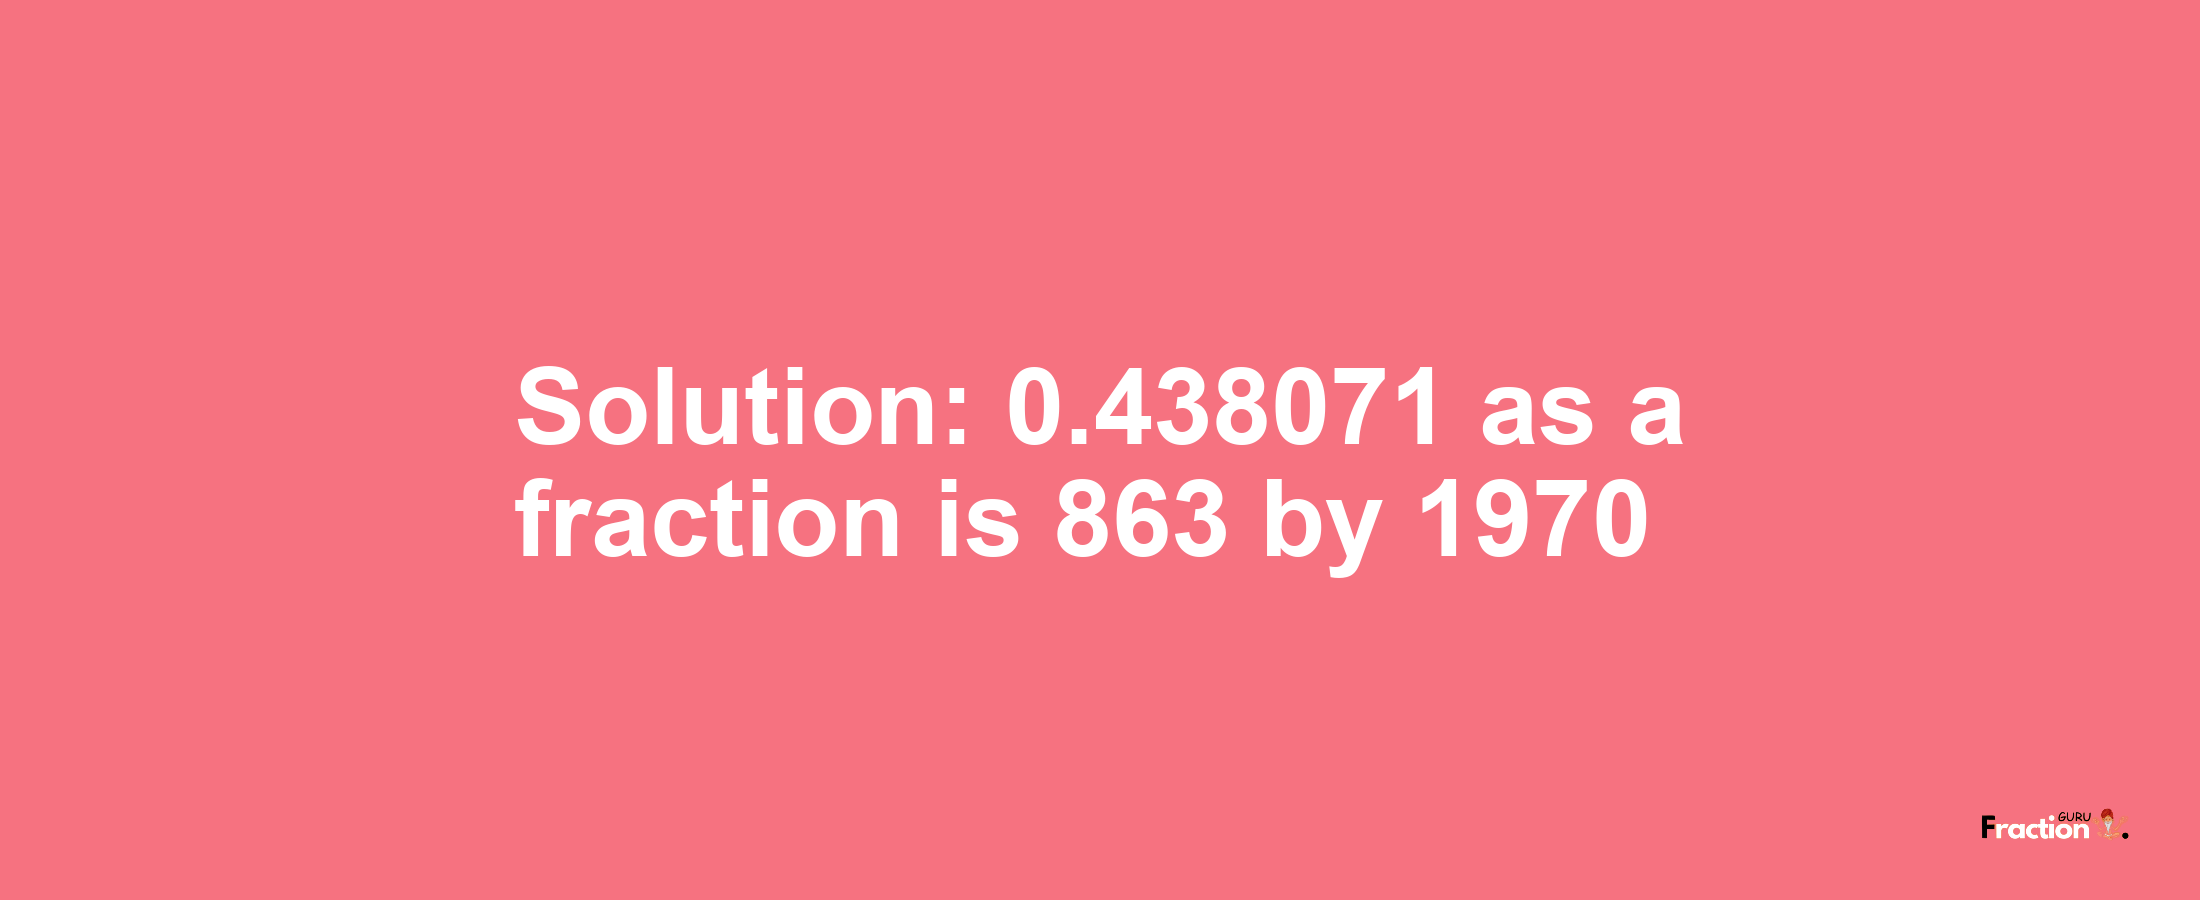 Solution:0.438071 as a fraction is 863/1970